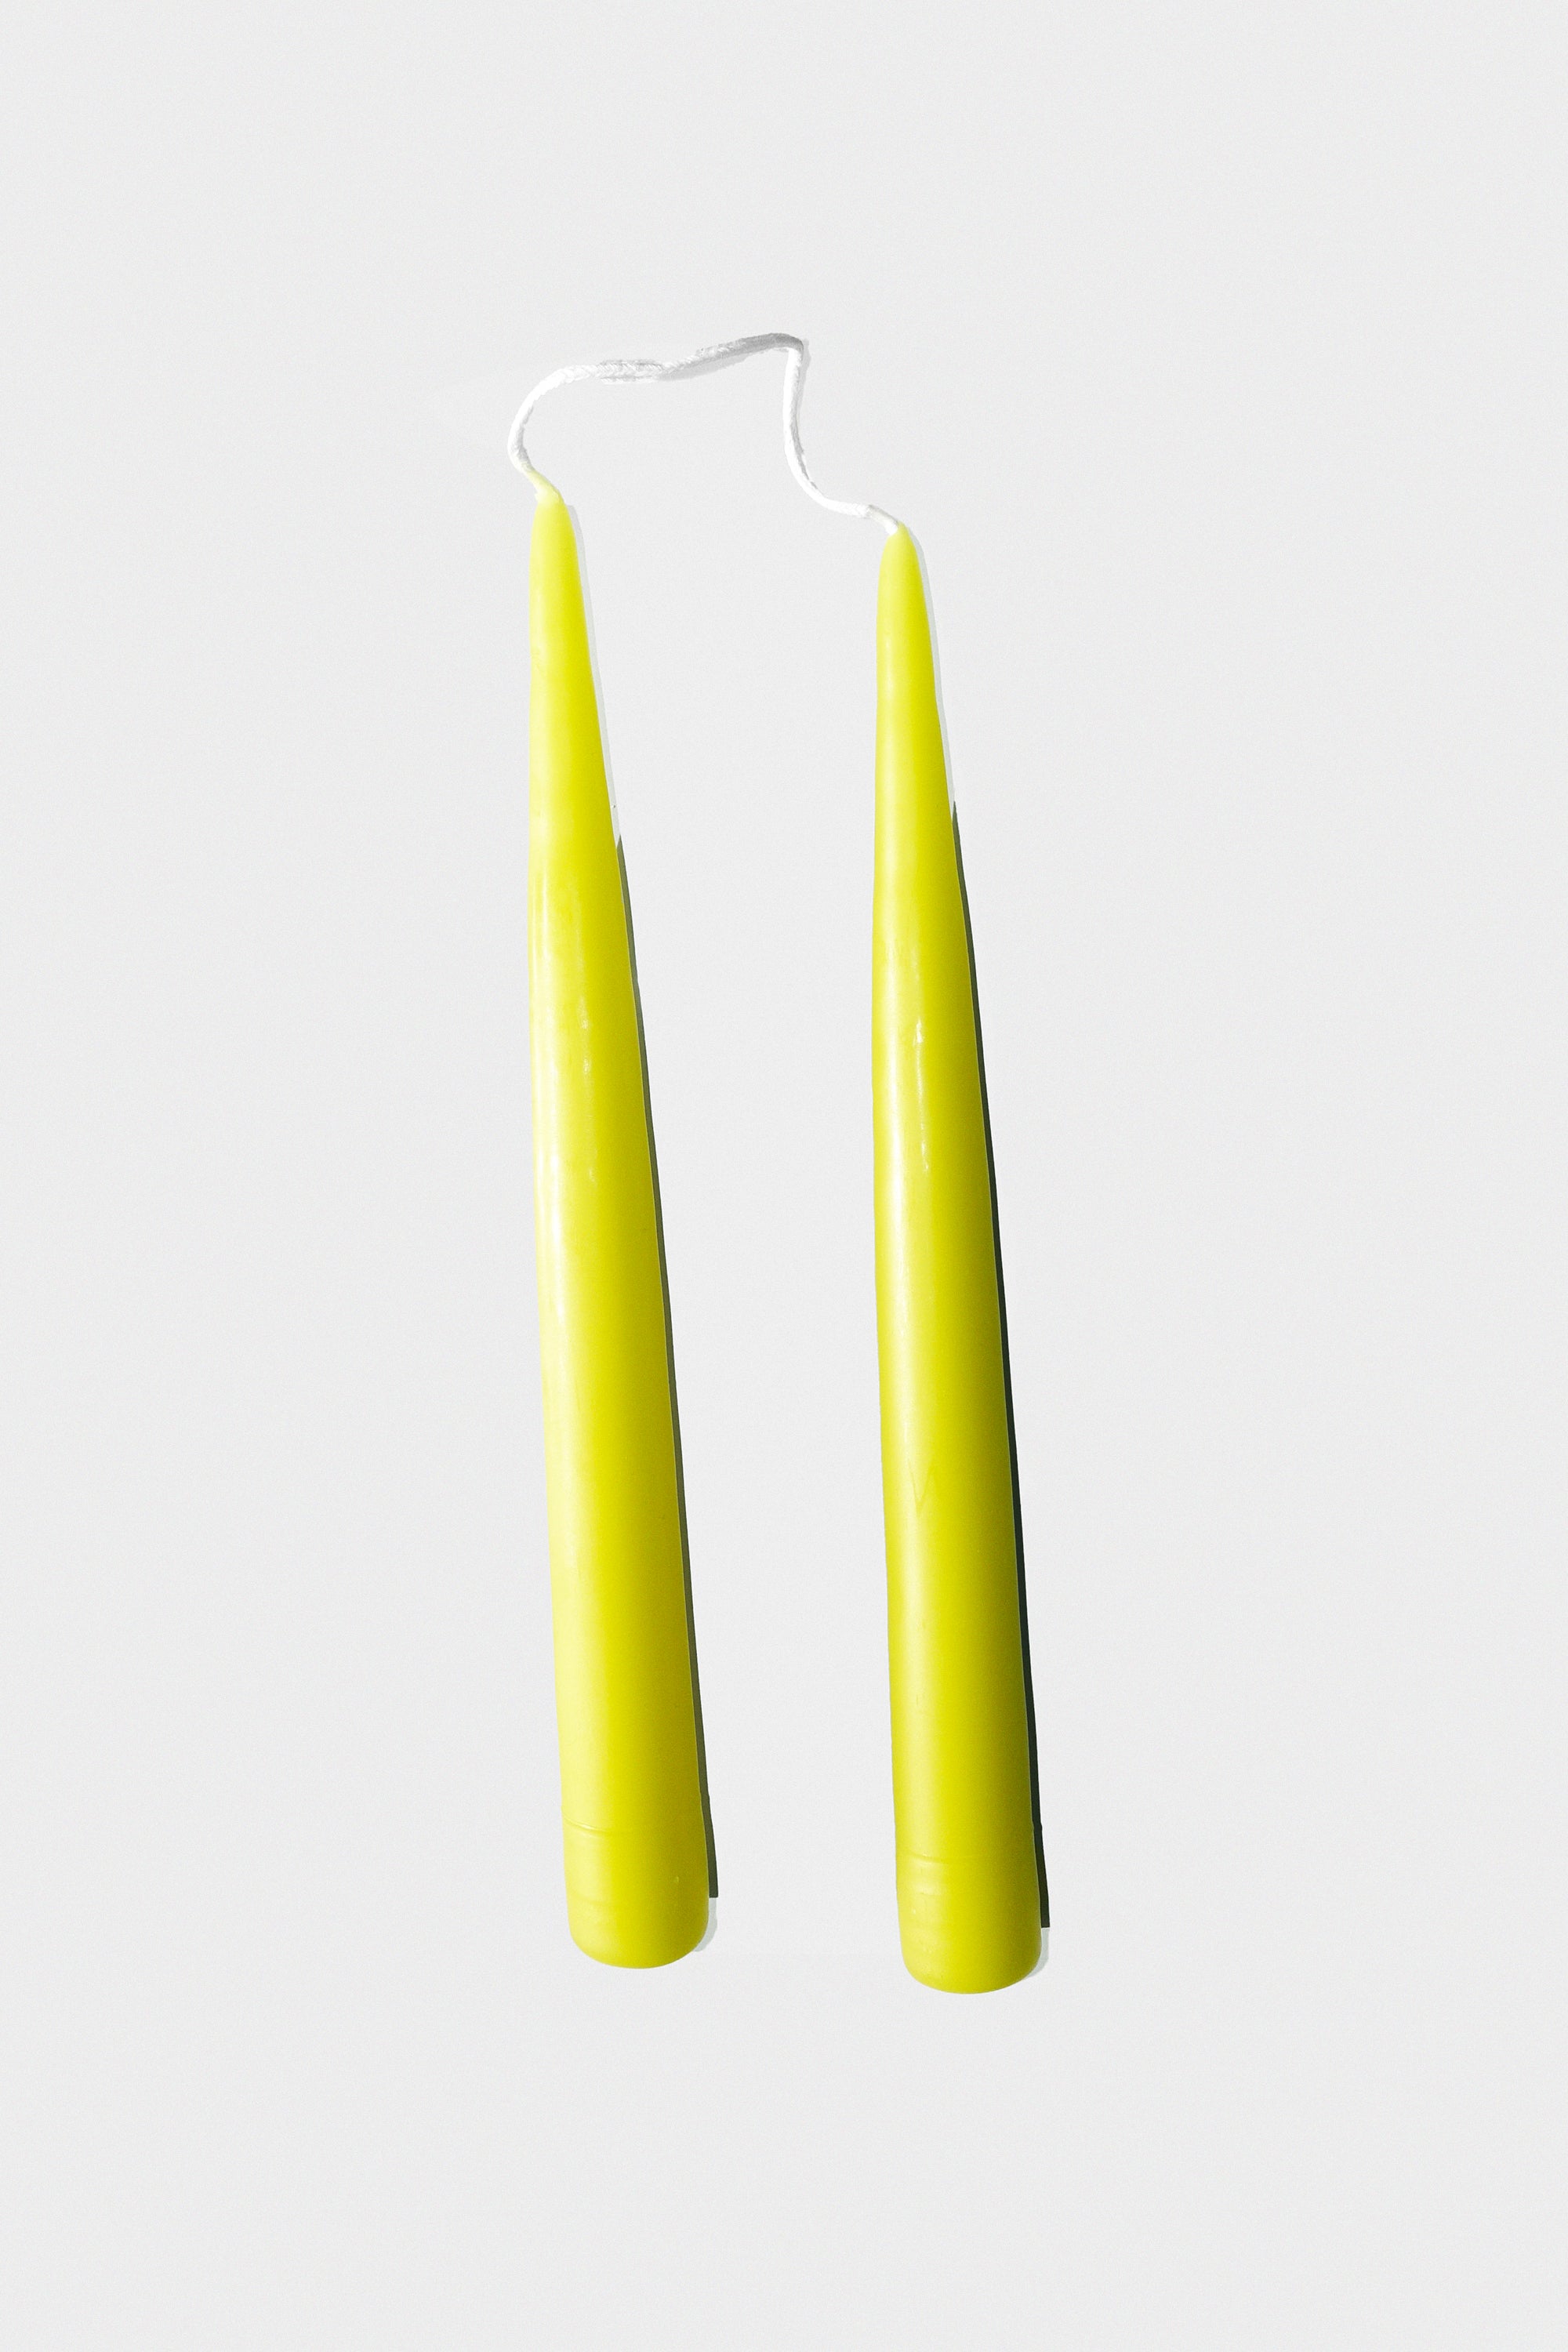 09" Taper Candles in Acid